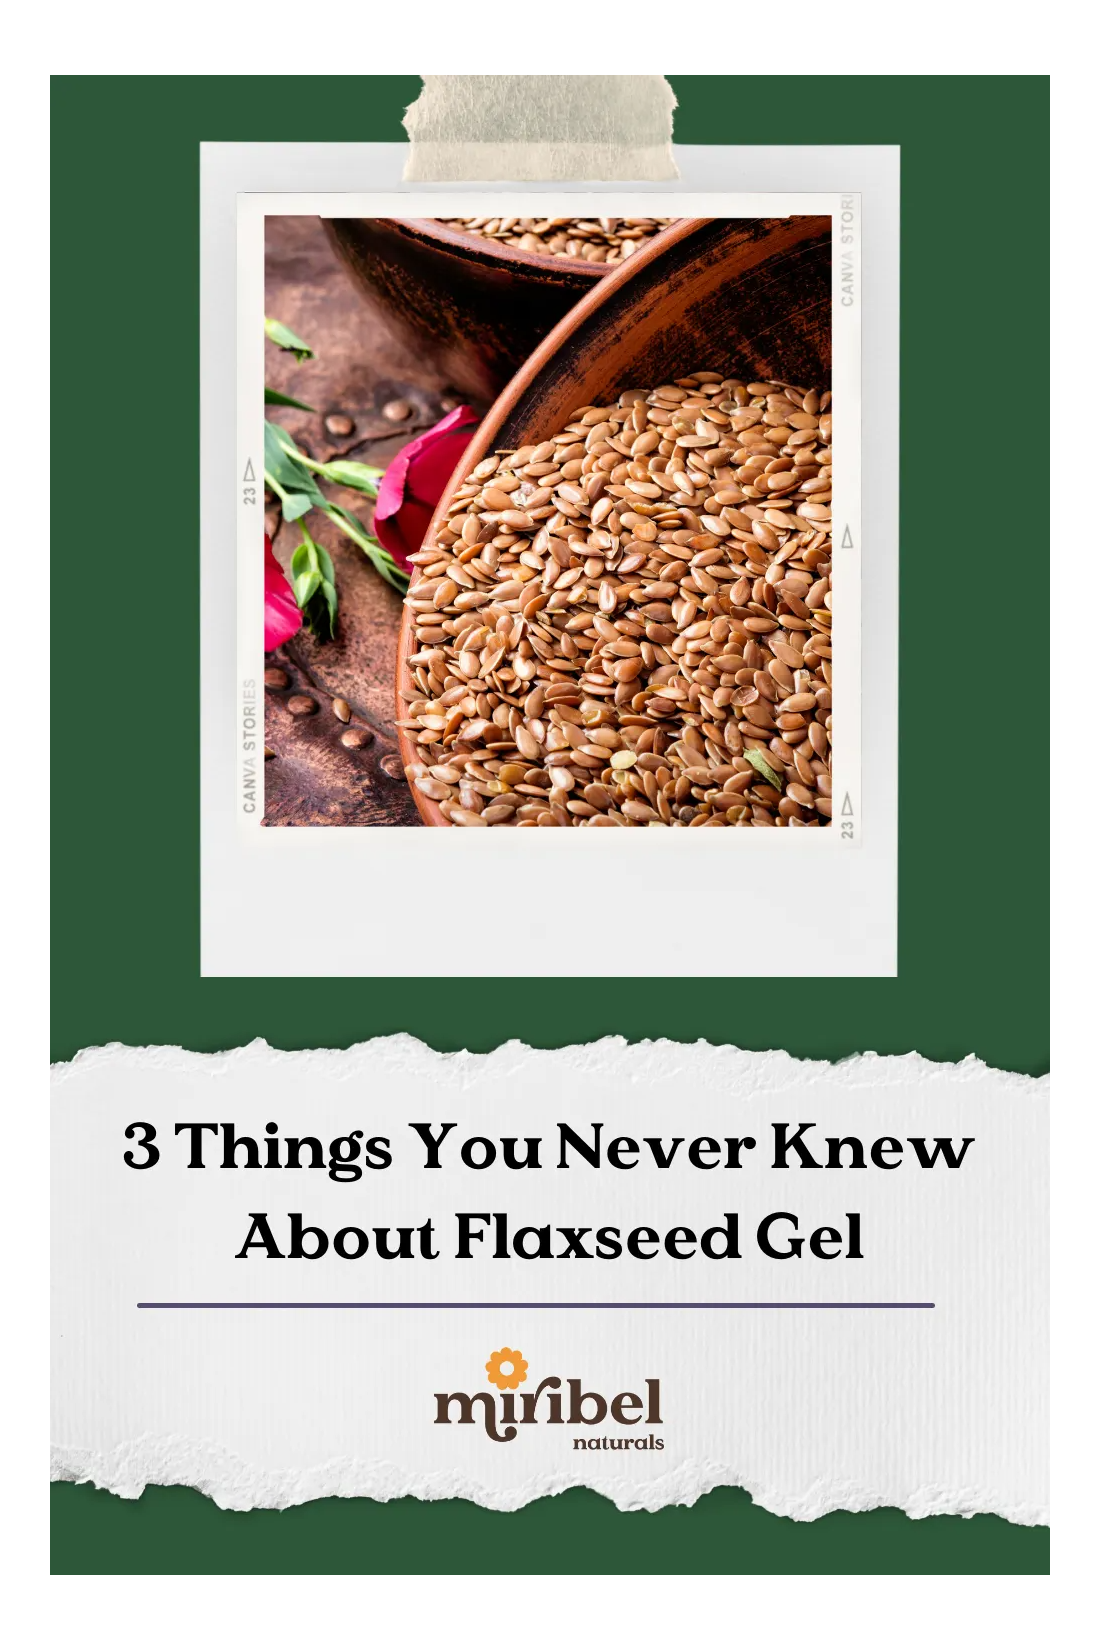 Flaxseed Gel: 3 Thinks Your Never Knew about Flaxseed Gel – Miribel Naturals